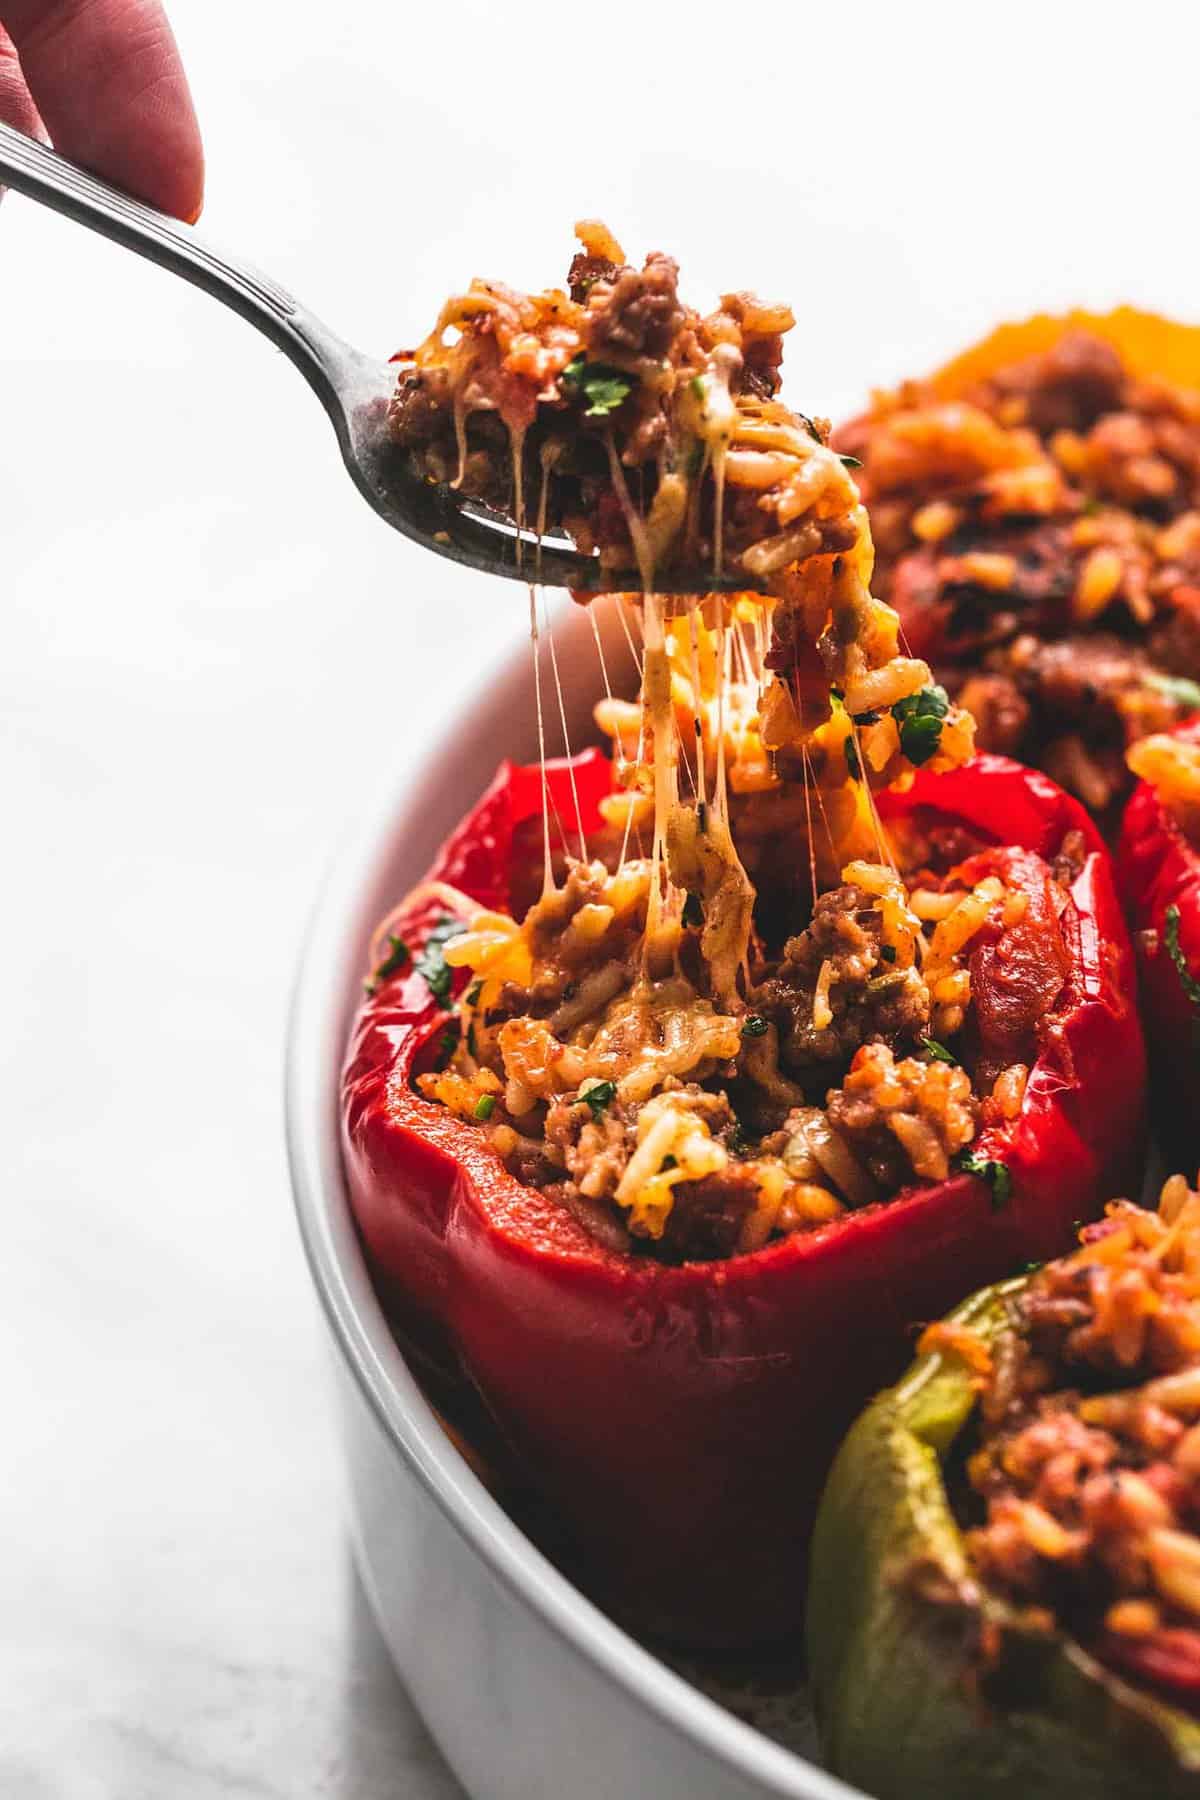 a spoon with a bite of stuffed peppers being lifted from a stuffed pepper.